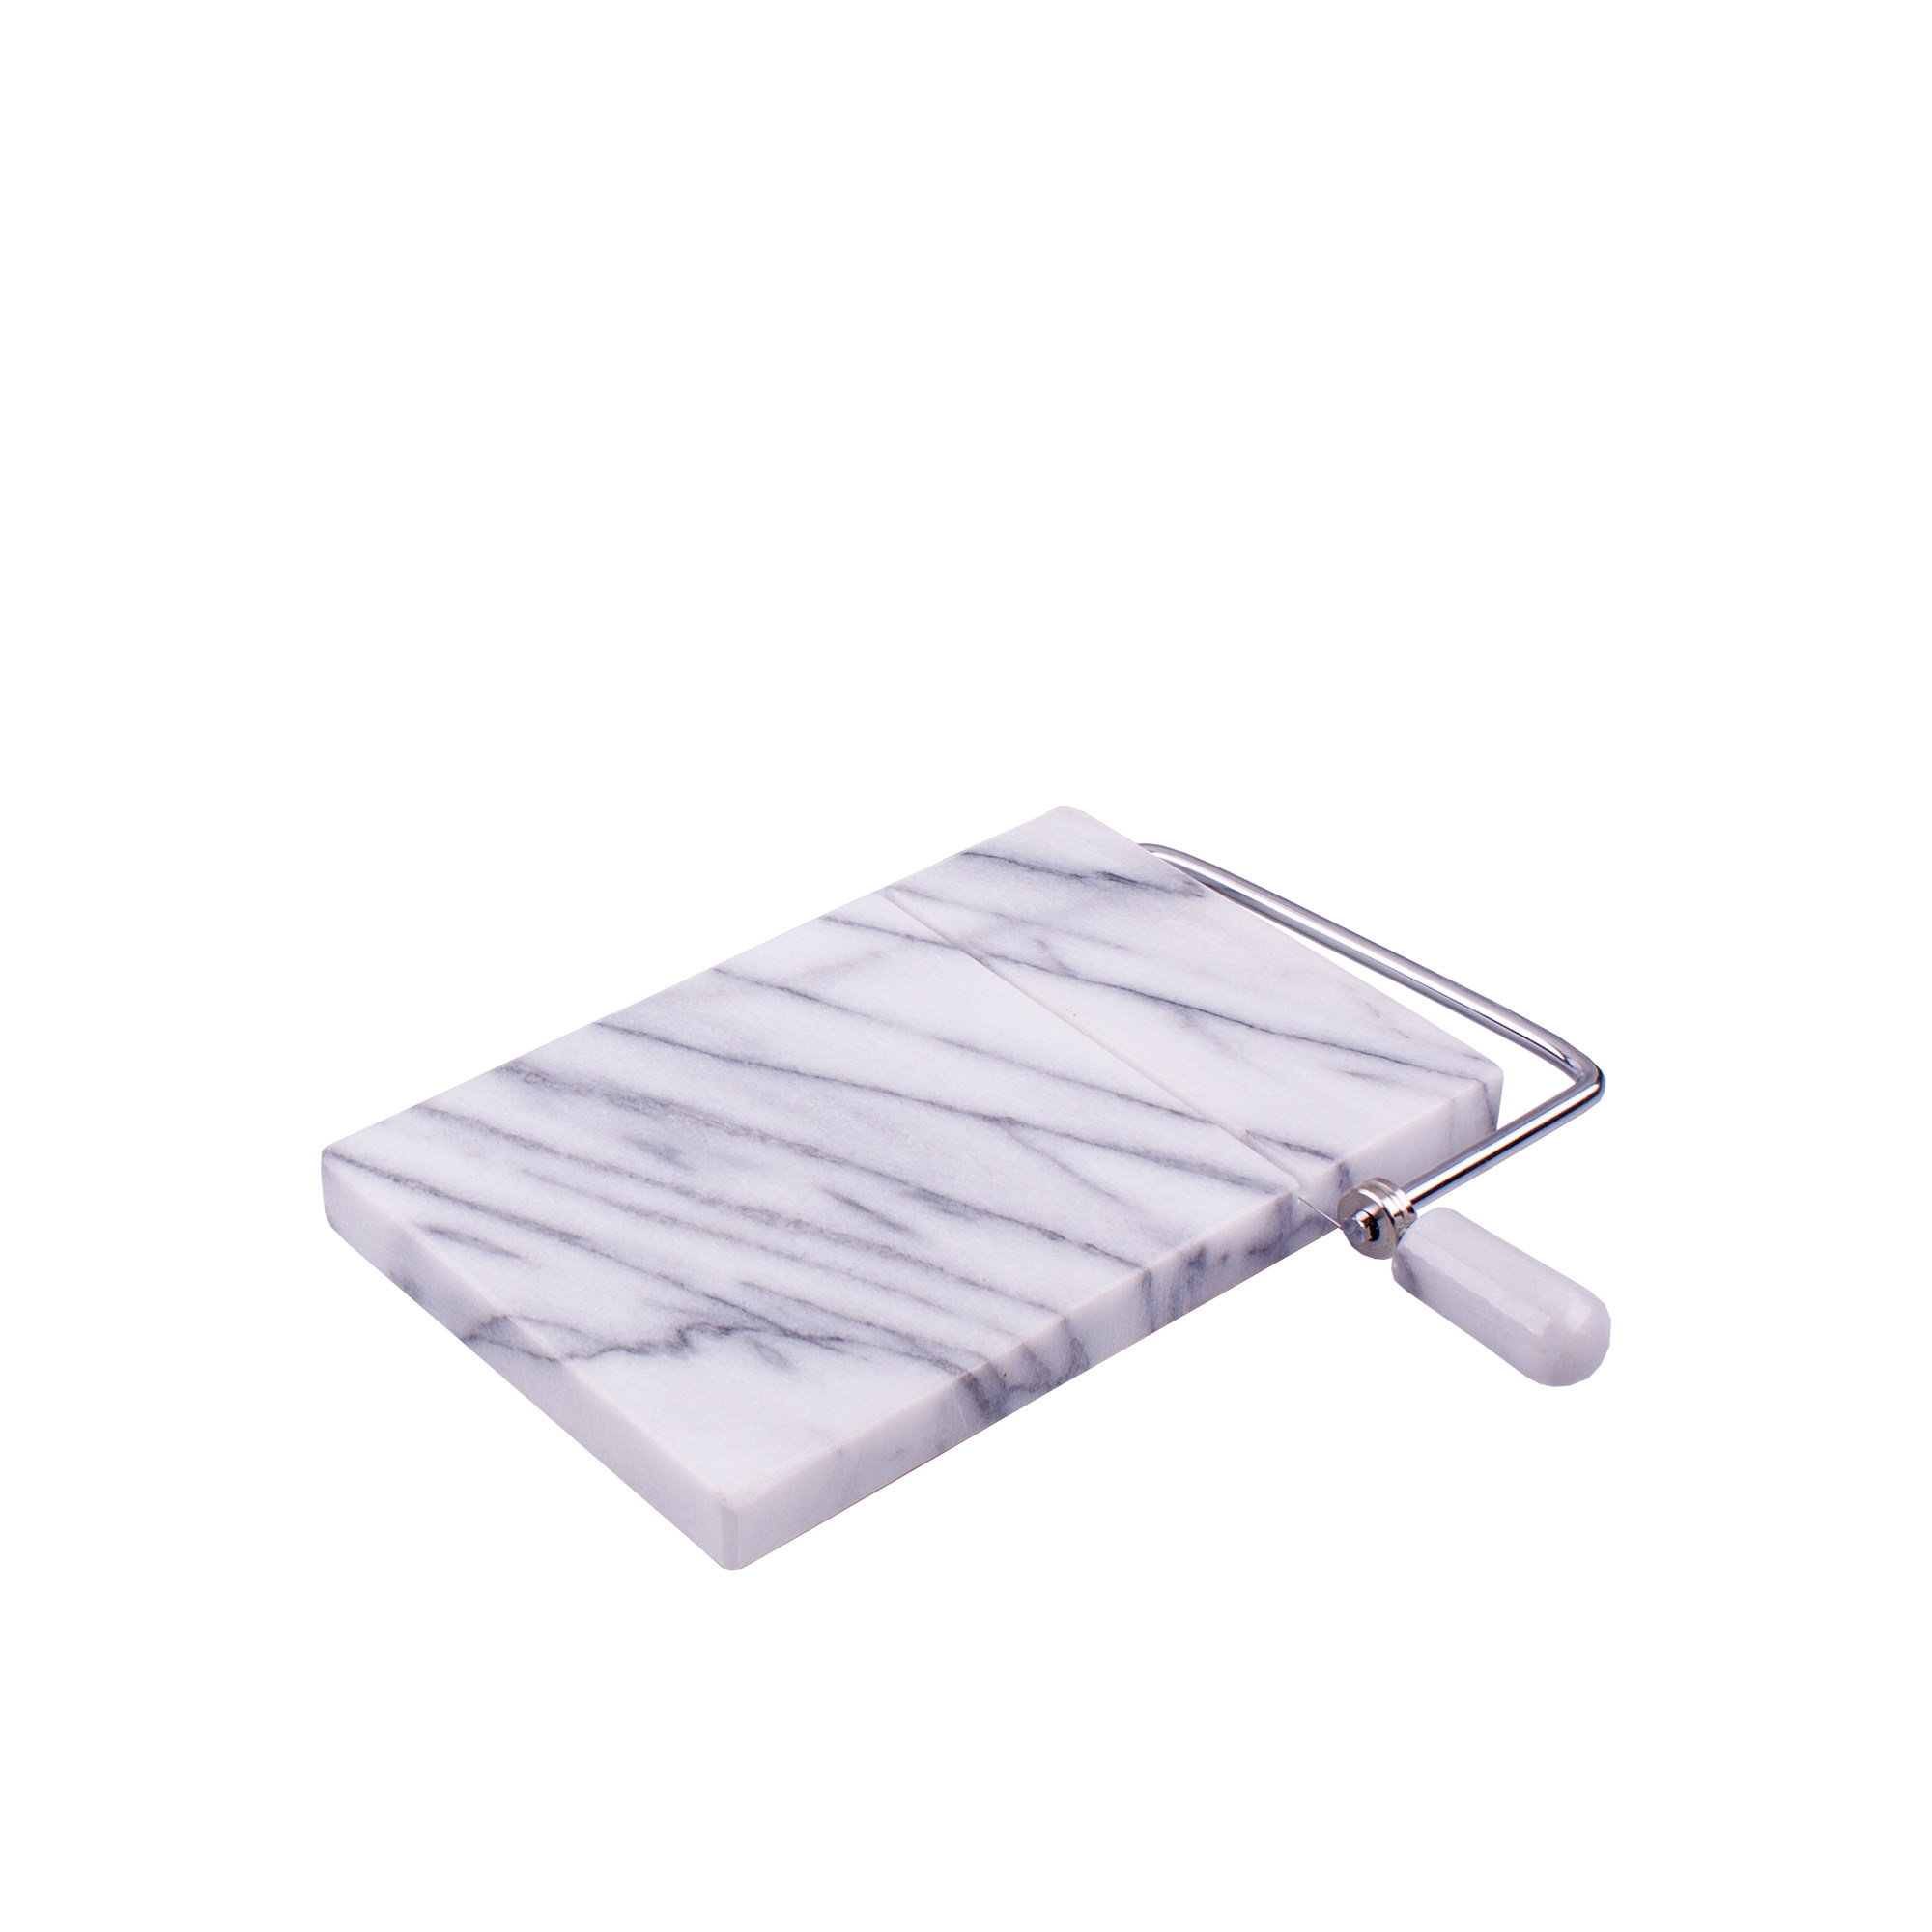 Integra Marble Cheese Board and Slicer Grey Image 1